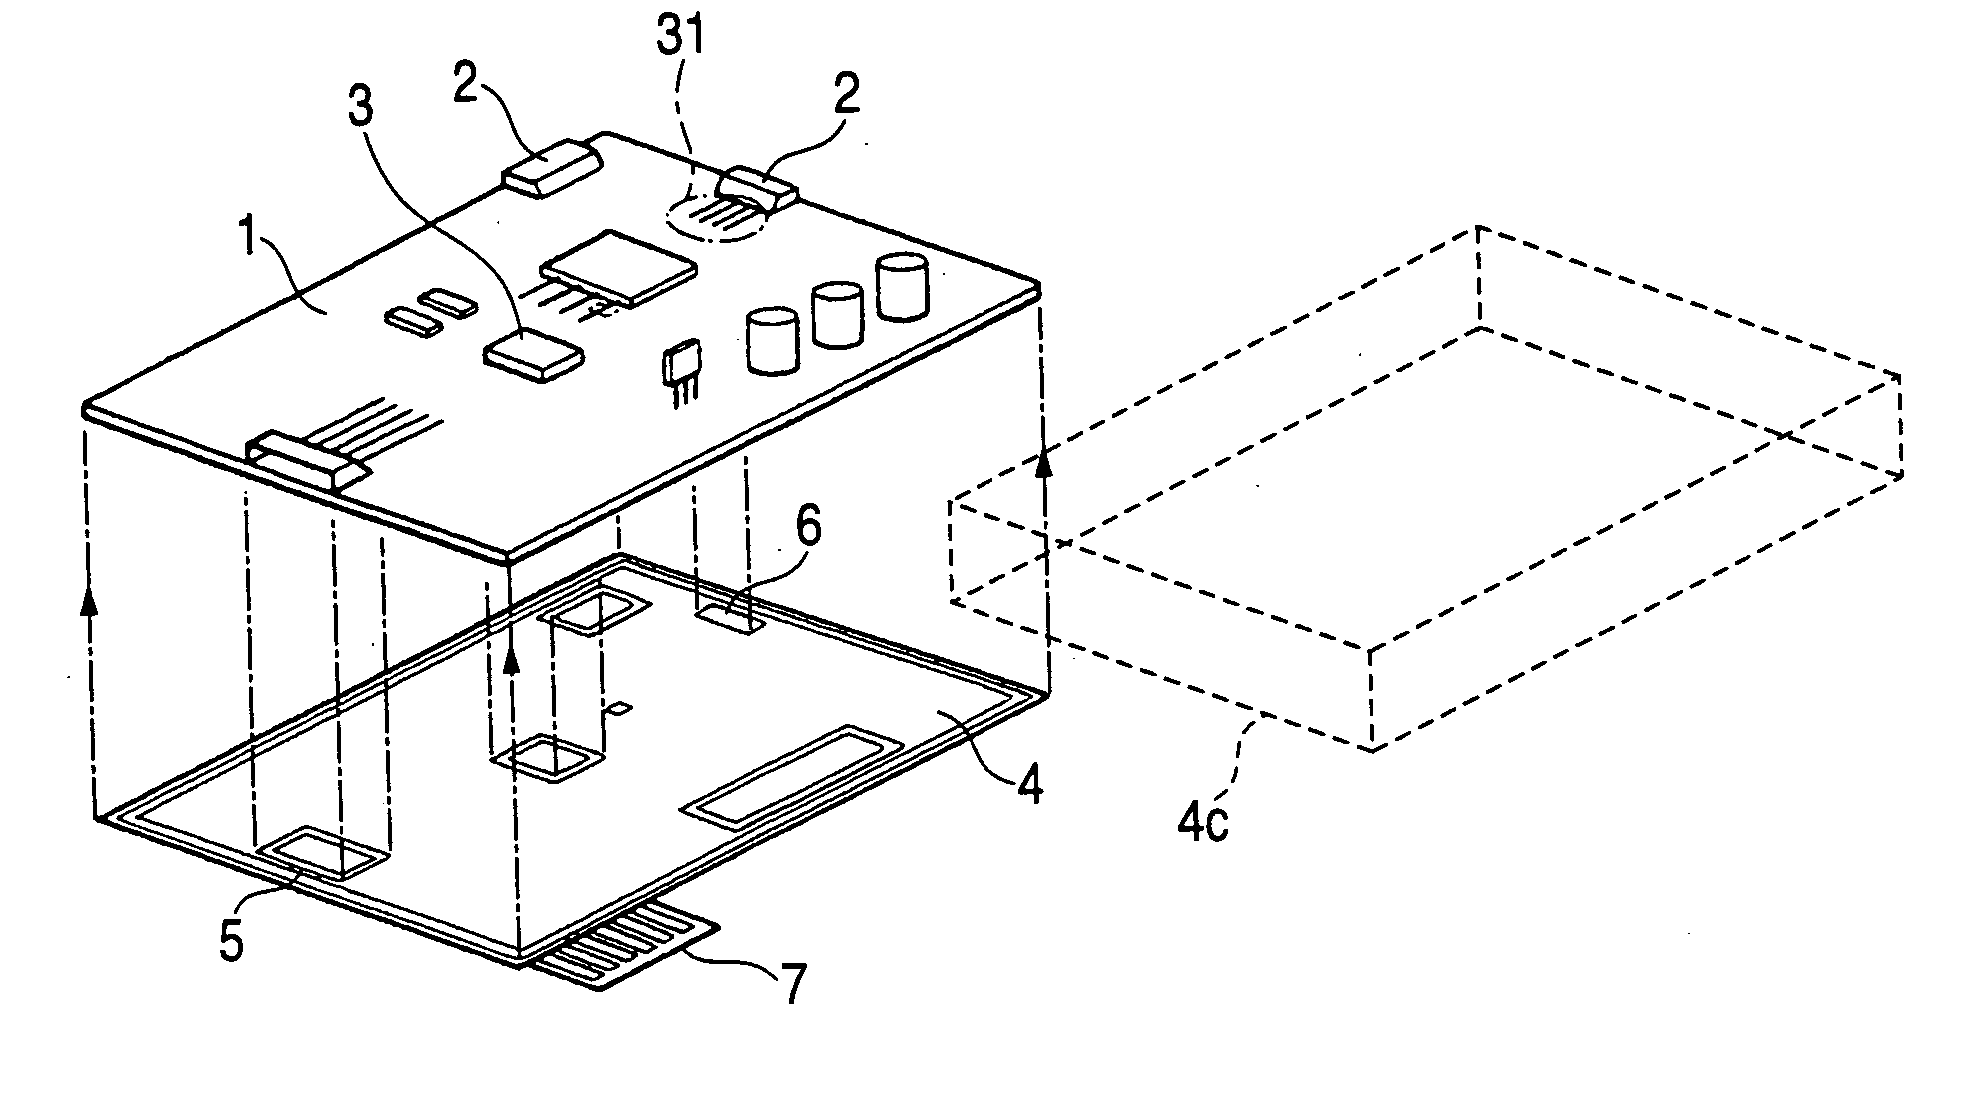 Circuit board inspection device